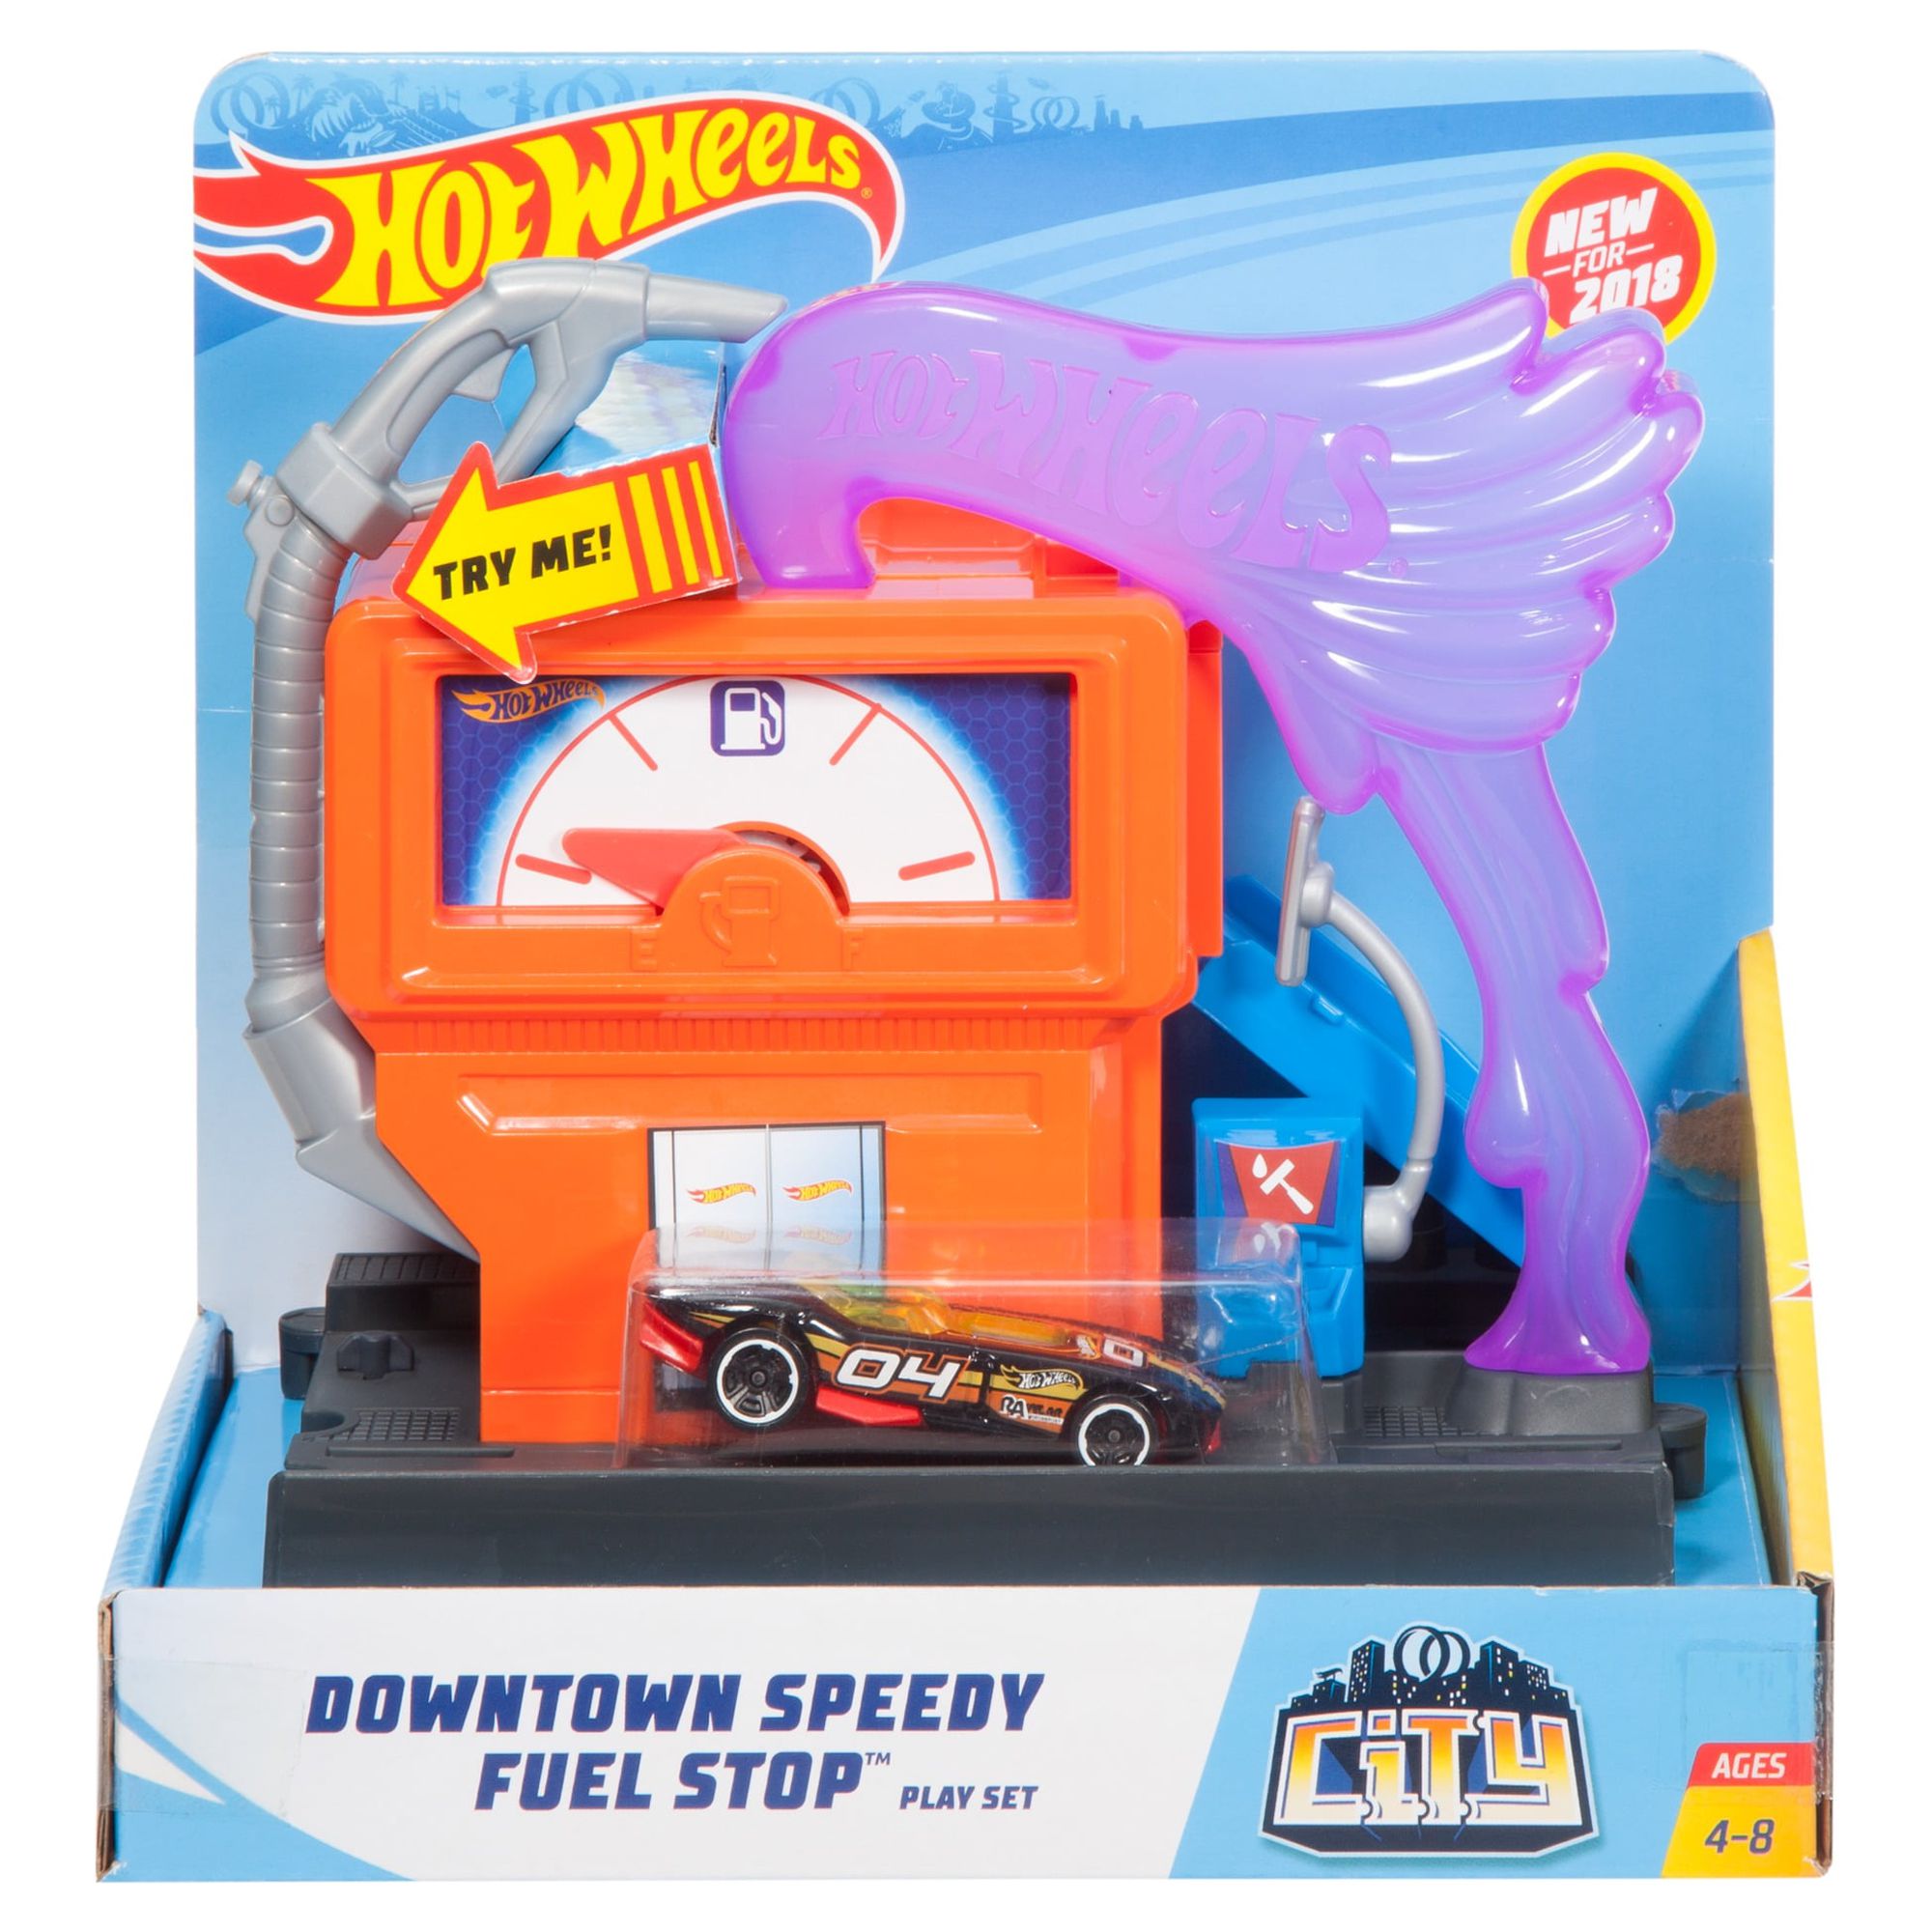 Hot Wheels City Downtown Super Fuel Stop Play Set - image 3 of 5